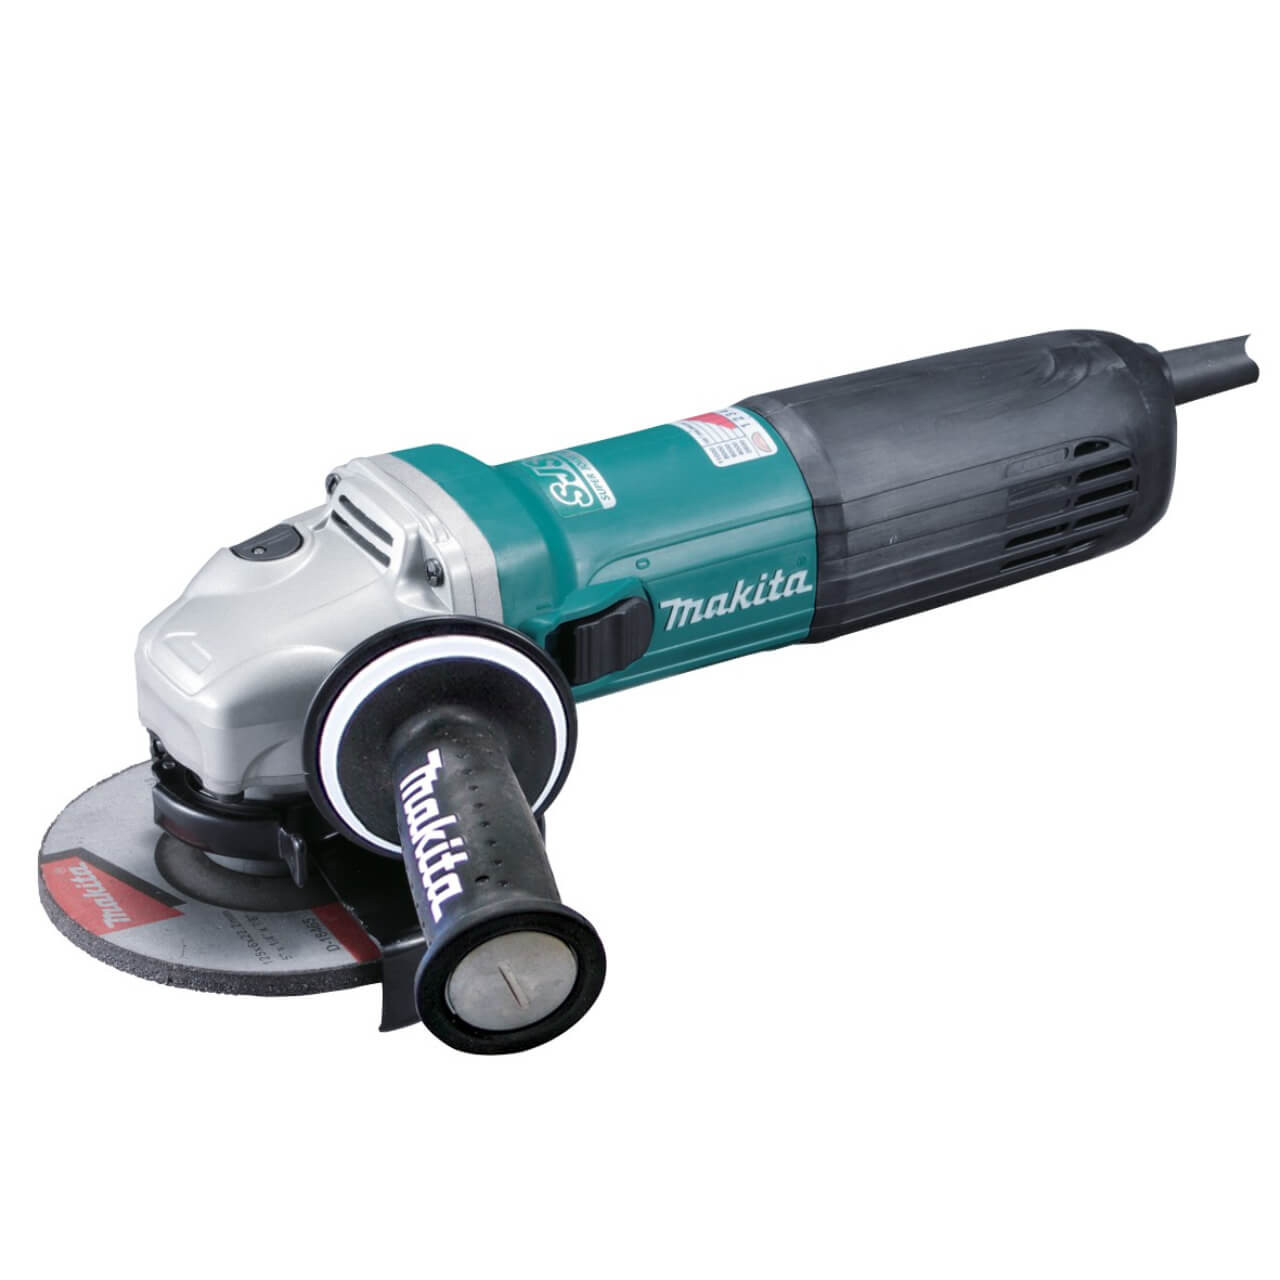 Makita 125mm (5”) Angle Grinder. 1400W. Constant Speed Control. soft start. current limiter. anti-restart. variable speed. SJSII